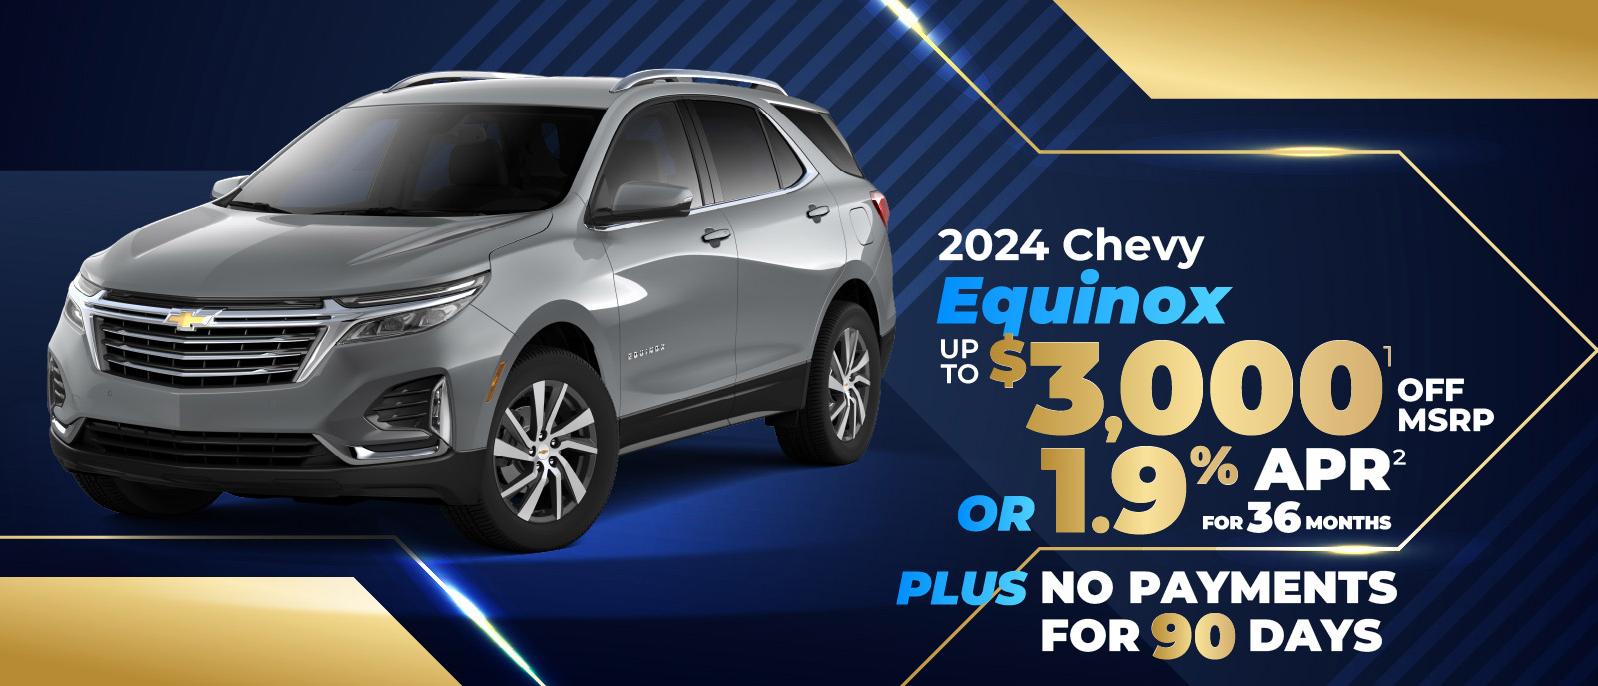 2024 Chevy Equinox - SAVE up to $3000 or 1.9% APR for 36 months plus no payments for 90 days